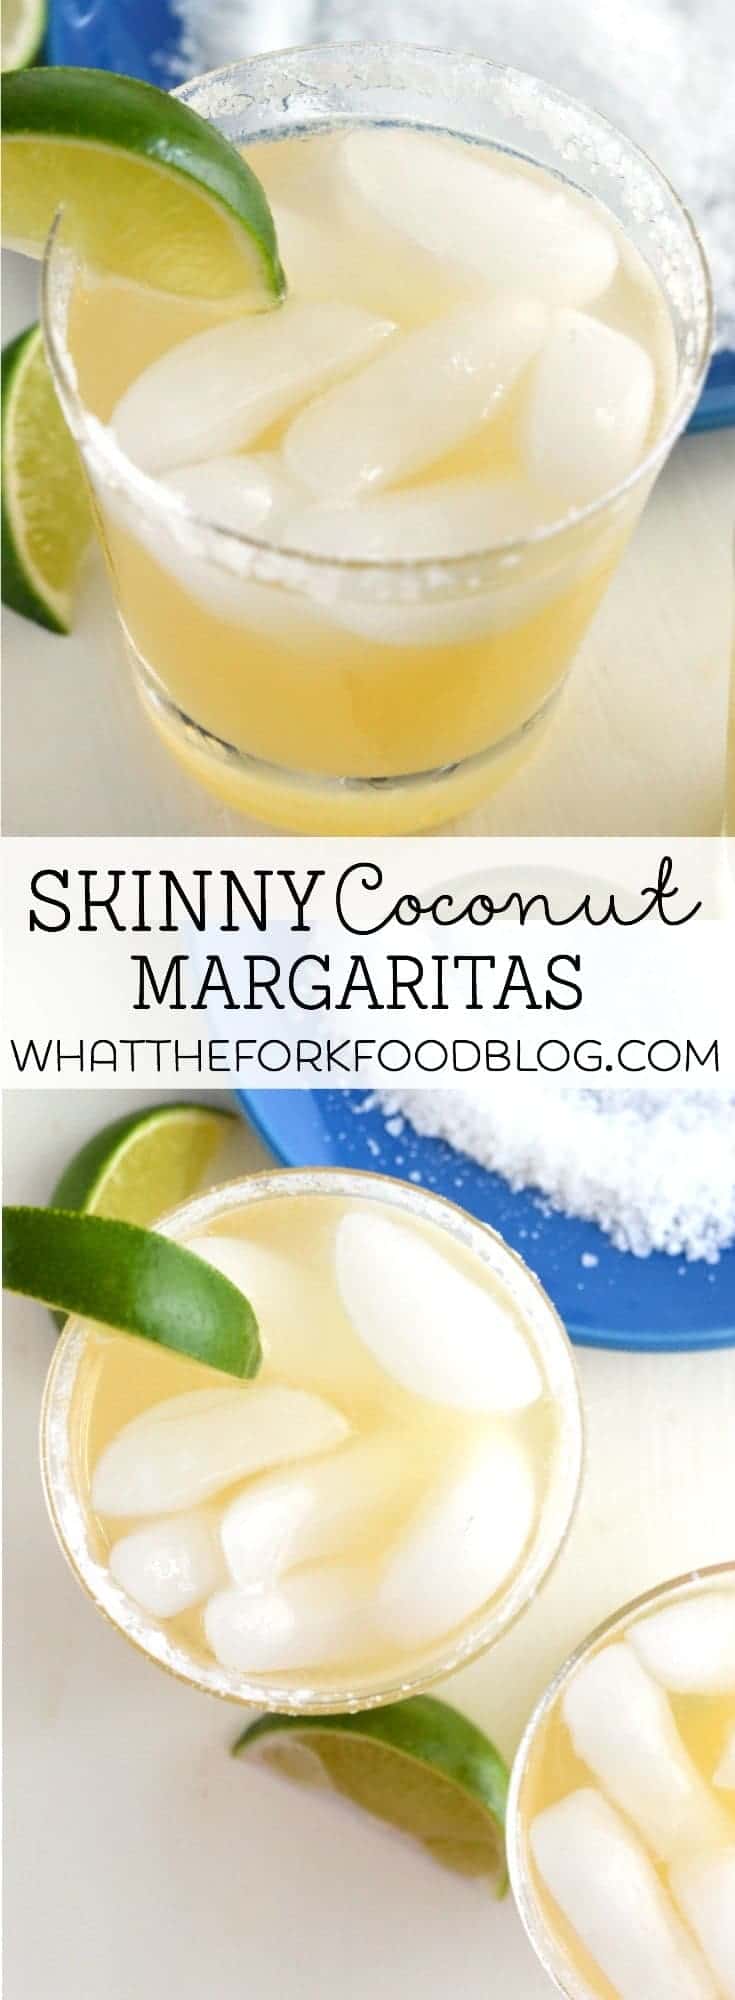 Skinny Coconut Margaritas from What The Fork Food Blog | @WhatTheForkBlog | whattheforkfoodblog.com